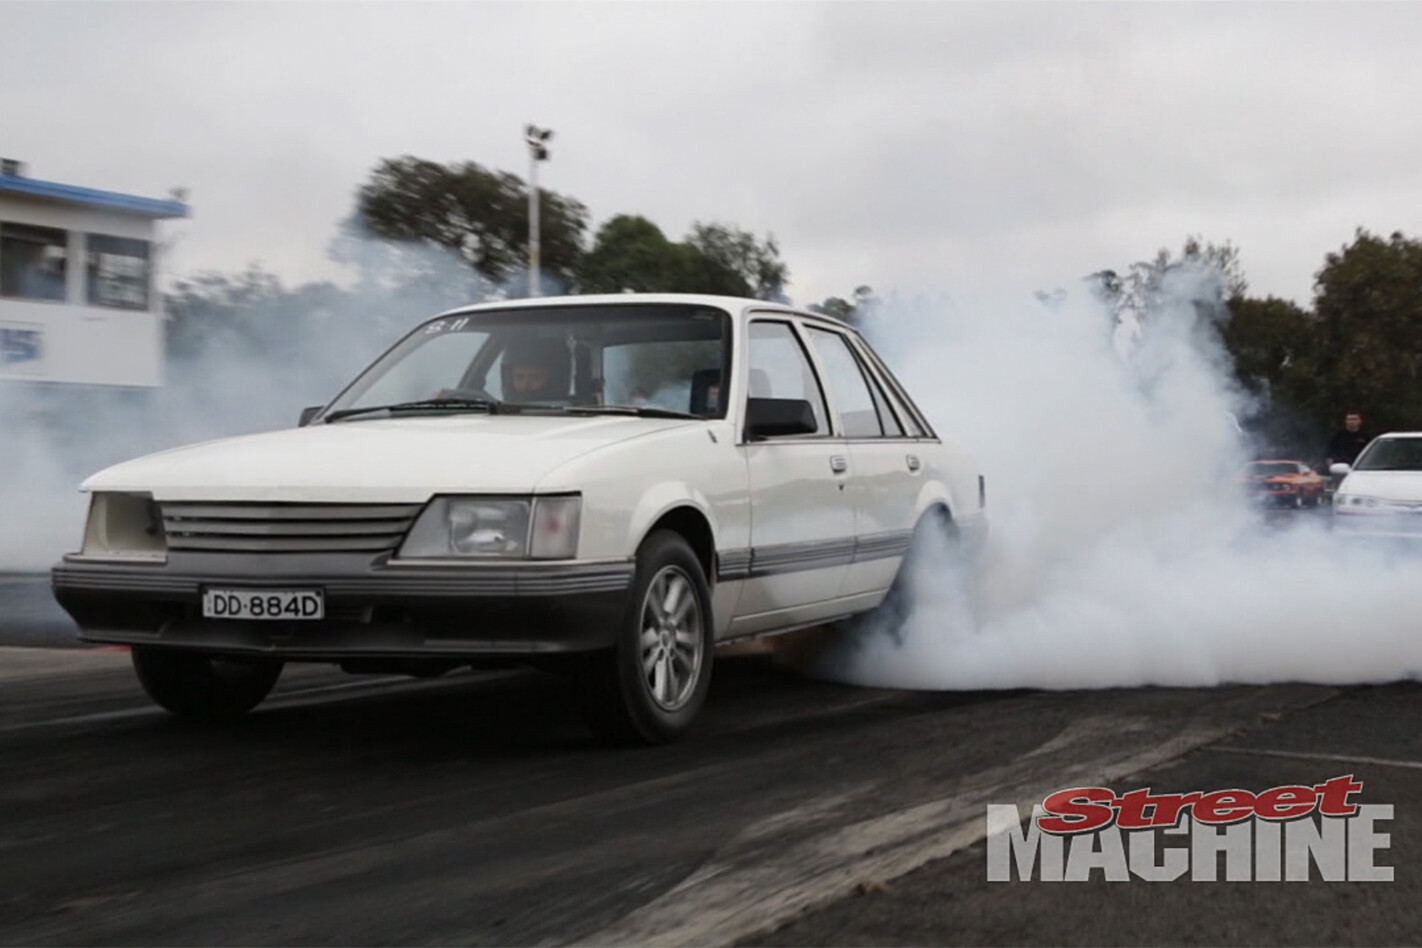 VIDEO: VK COMMODORE POWERED BY FOUR-LITRE FORD